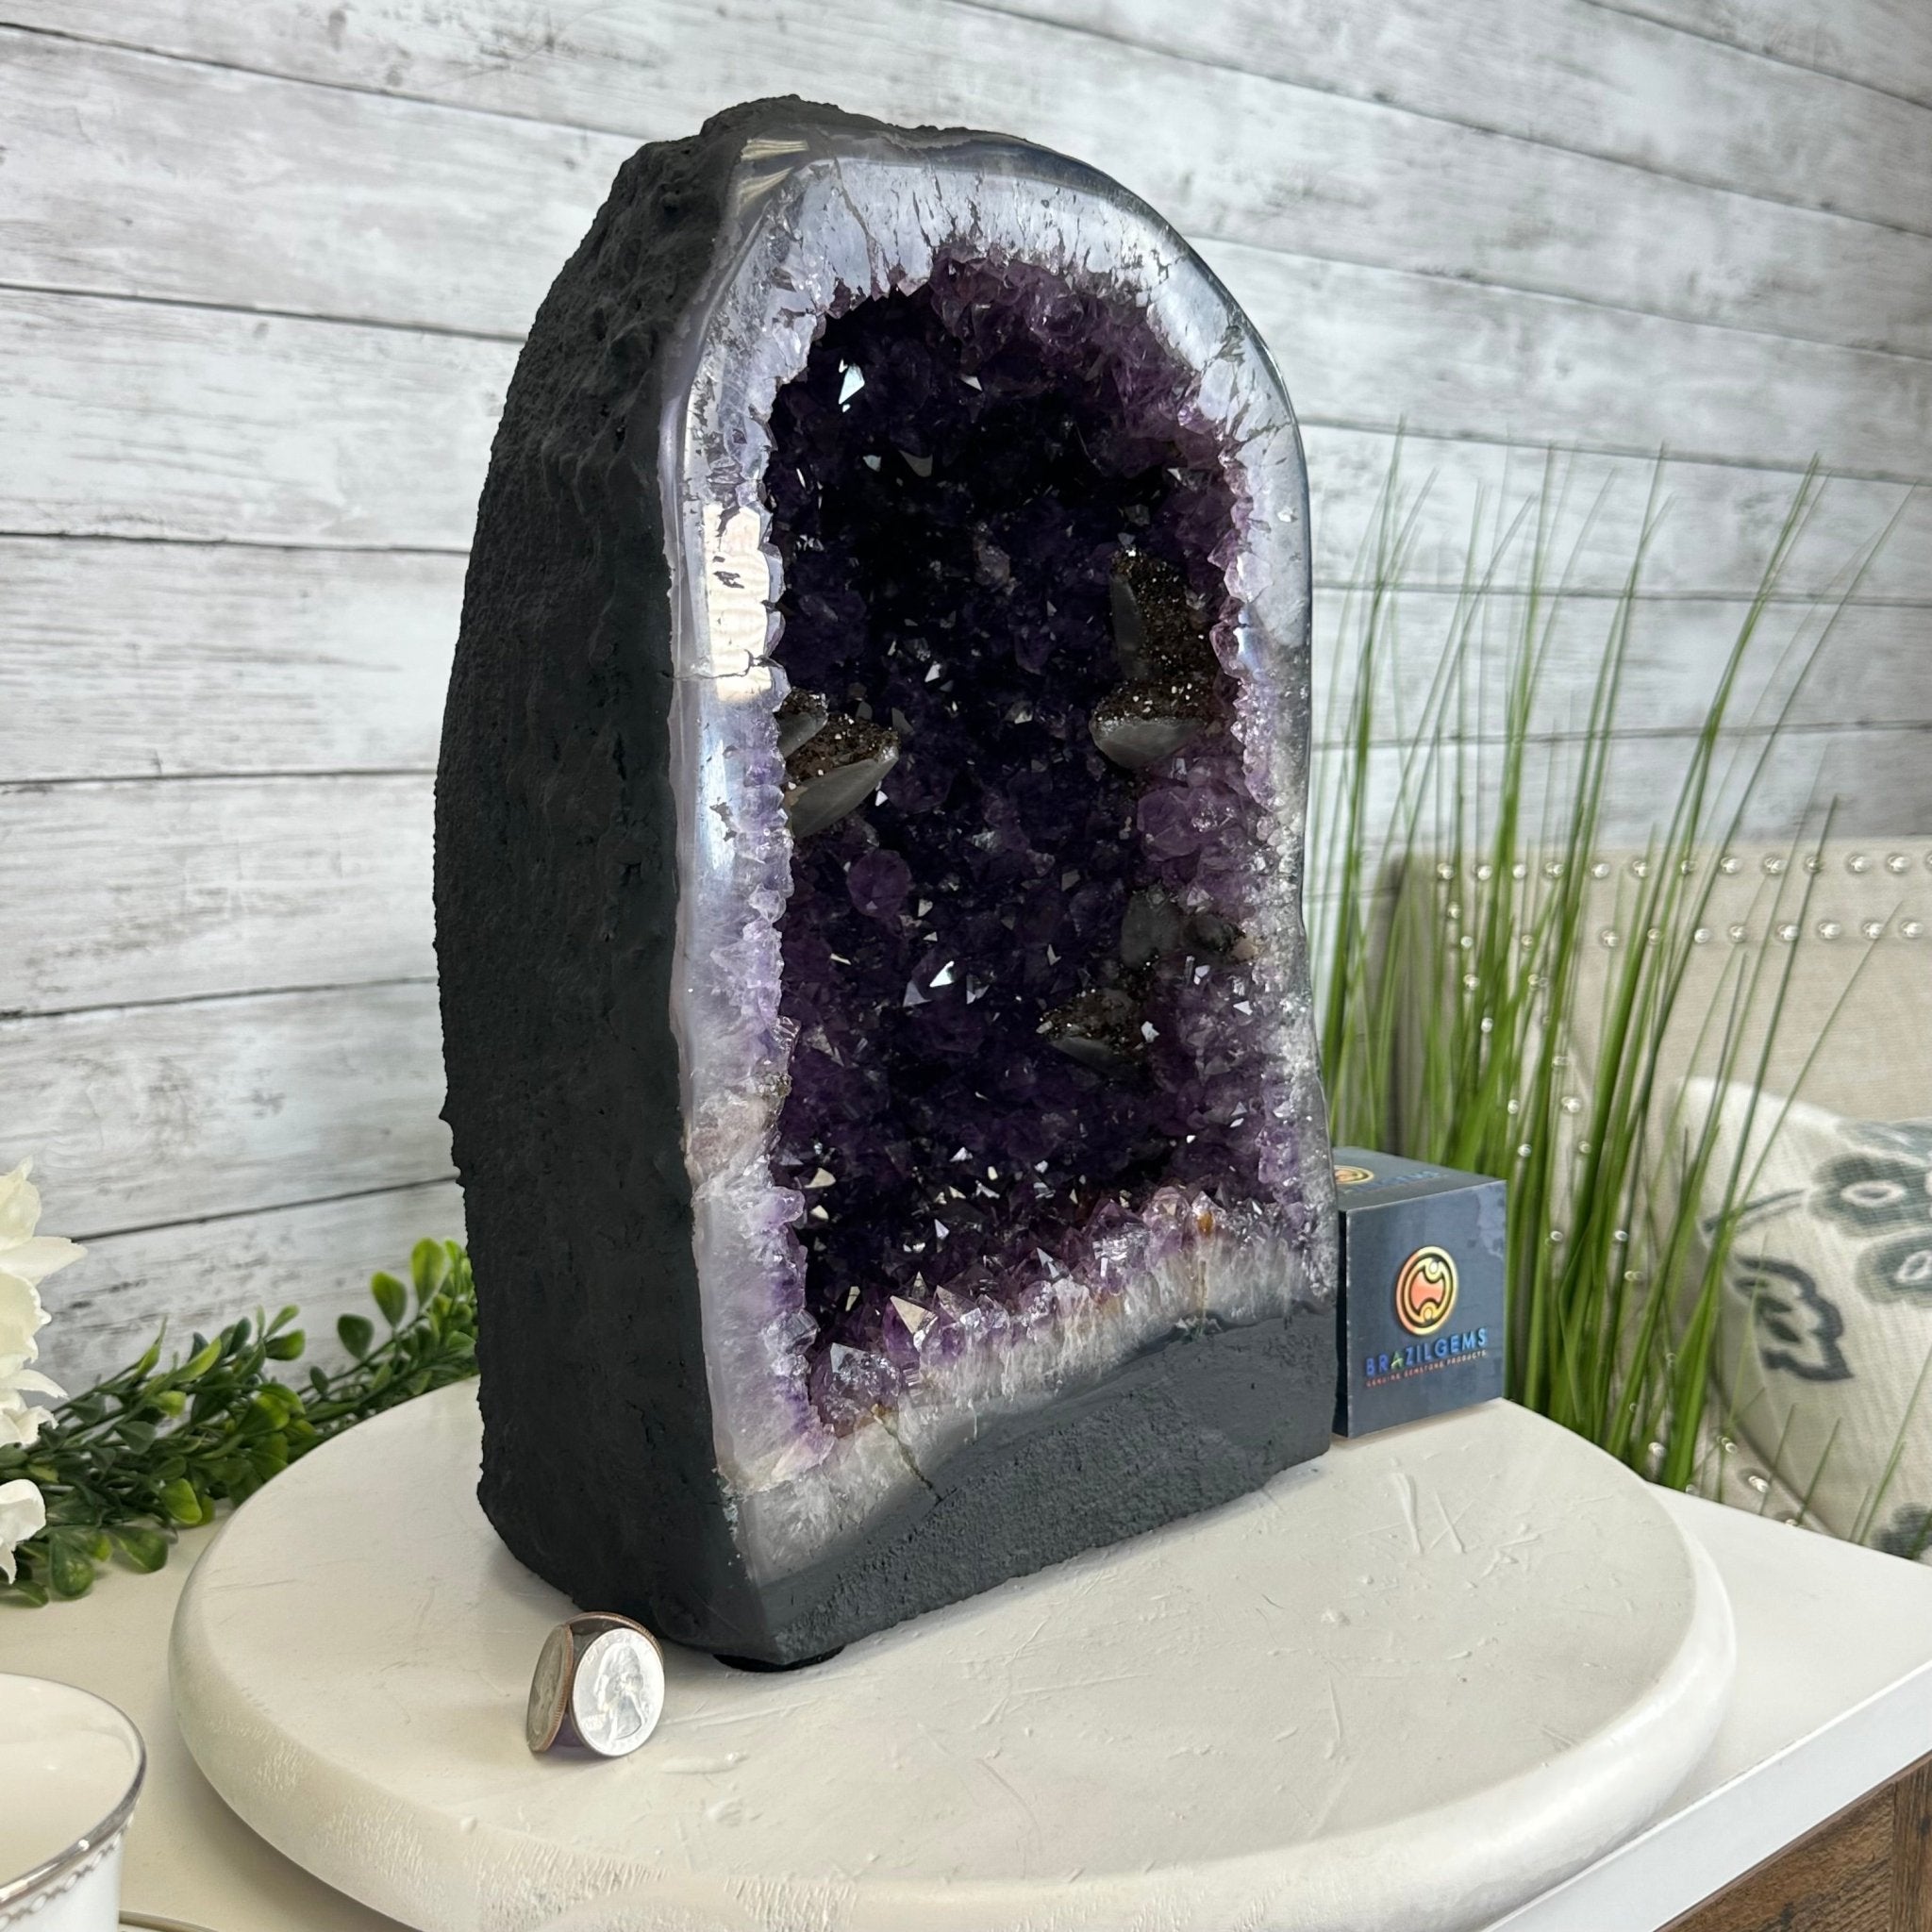 Quality Brazilian Amethyst Cathedral, 29.9 lbs & 13.1" Tall, #5601 - 1402 - Brazil GemsBrazil GemsQuality Brazilian Amethyst Cathedral, 29.9 lbs & 13.1" Tall, #5601 - 1402Cathedrals5601 - 1402